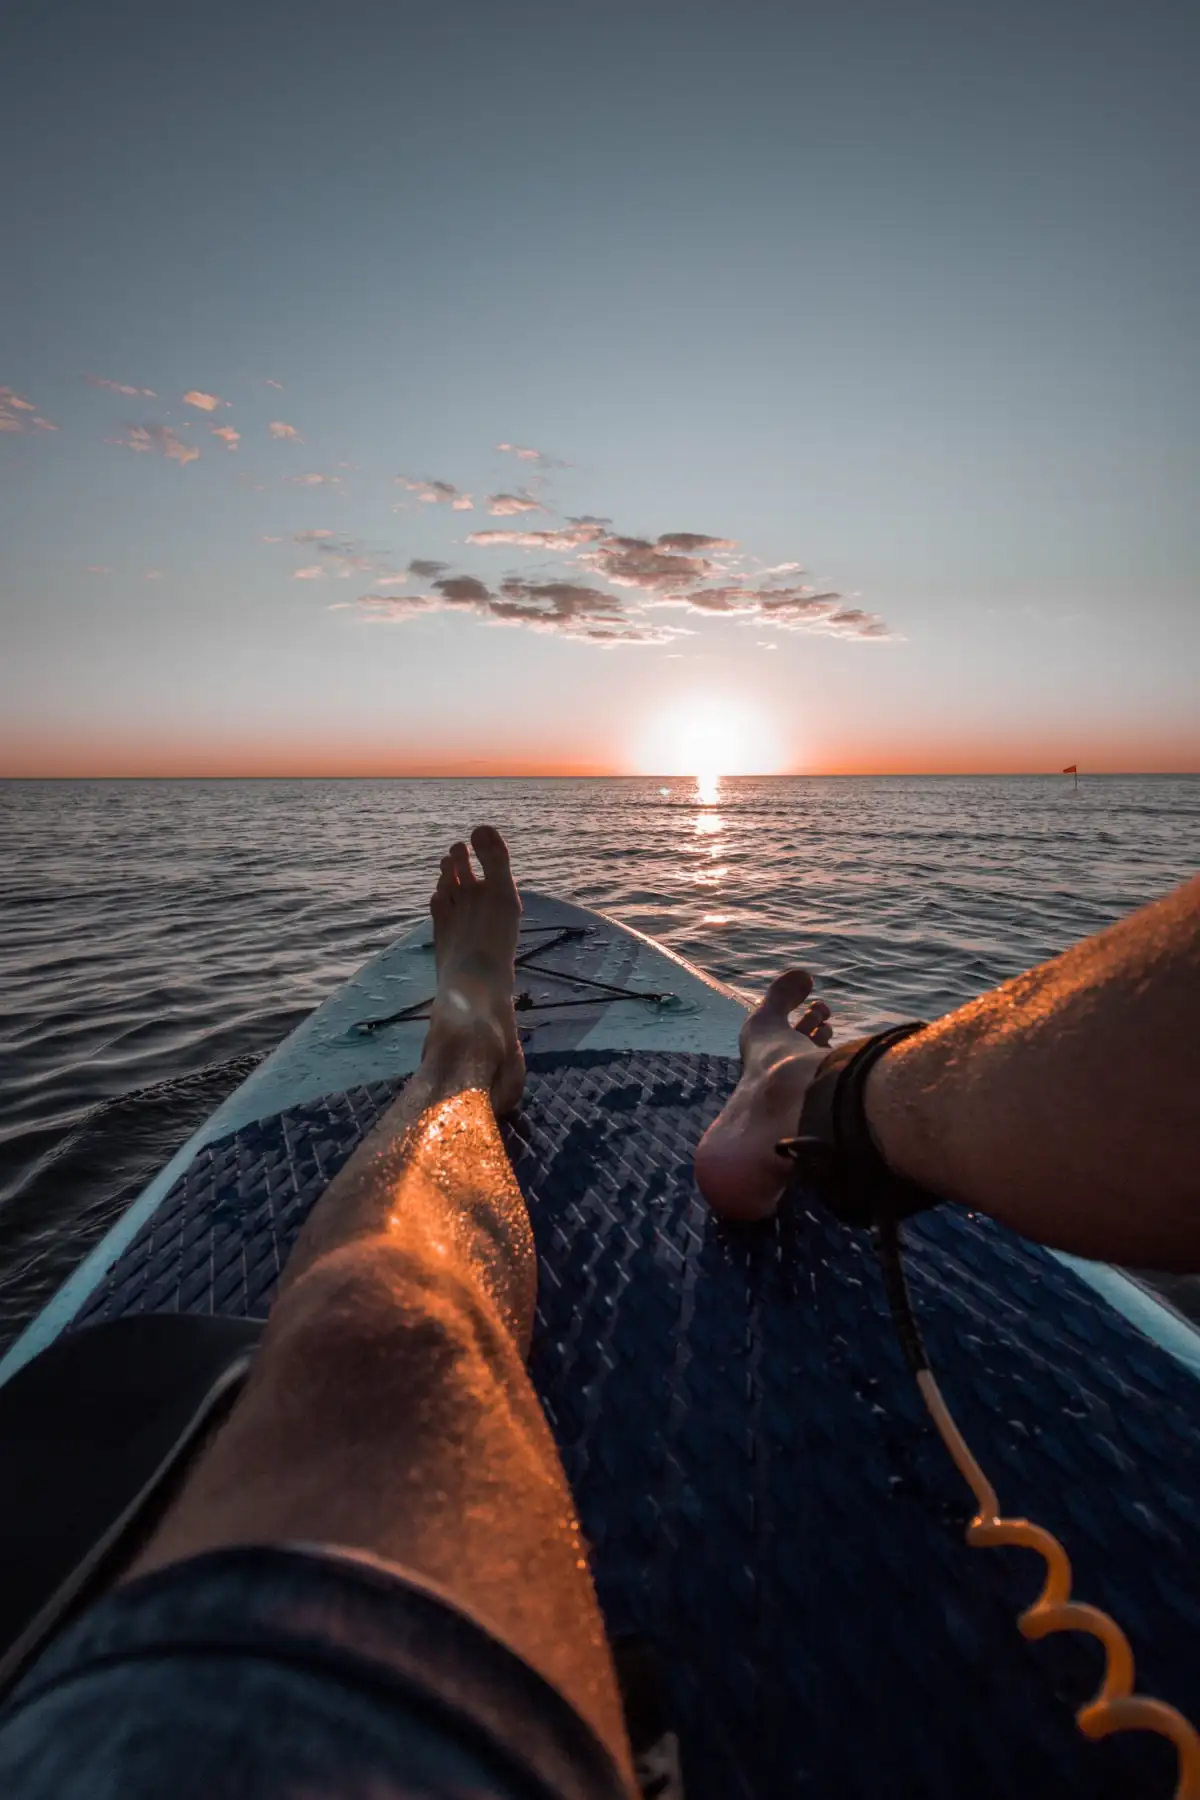 First-person view of a person's legs on a stand-up paddleboard, gliding over calm waters towards a beautiful sunset horizon.